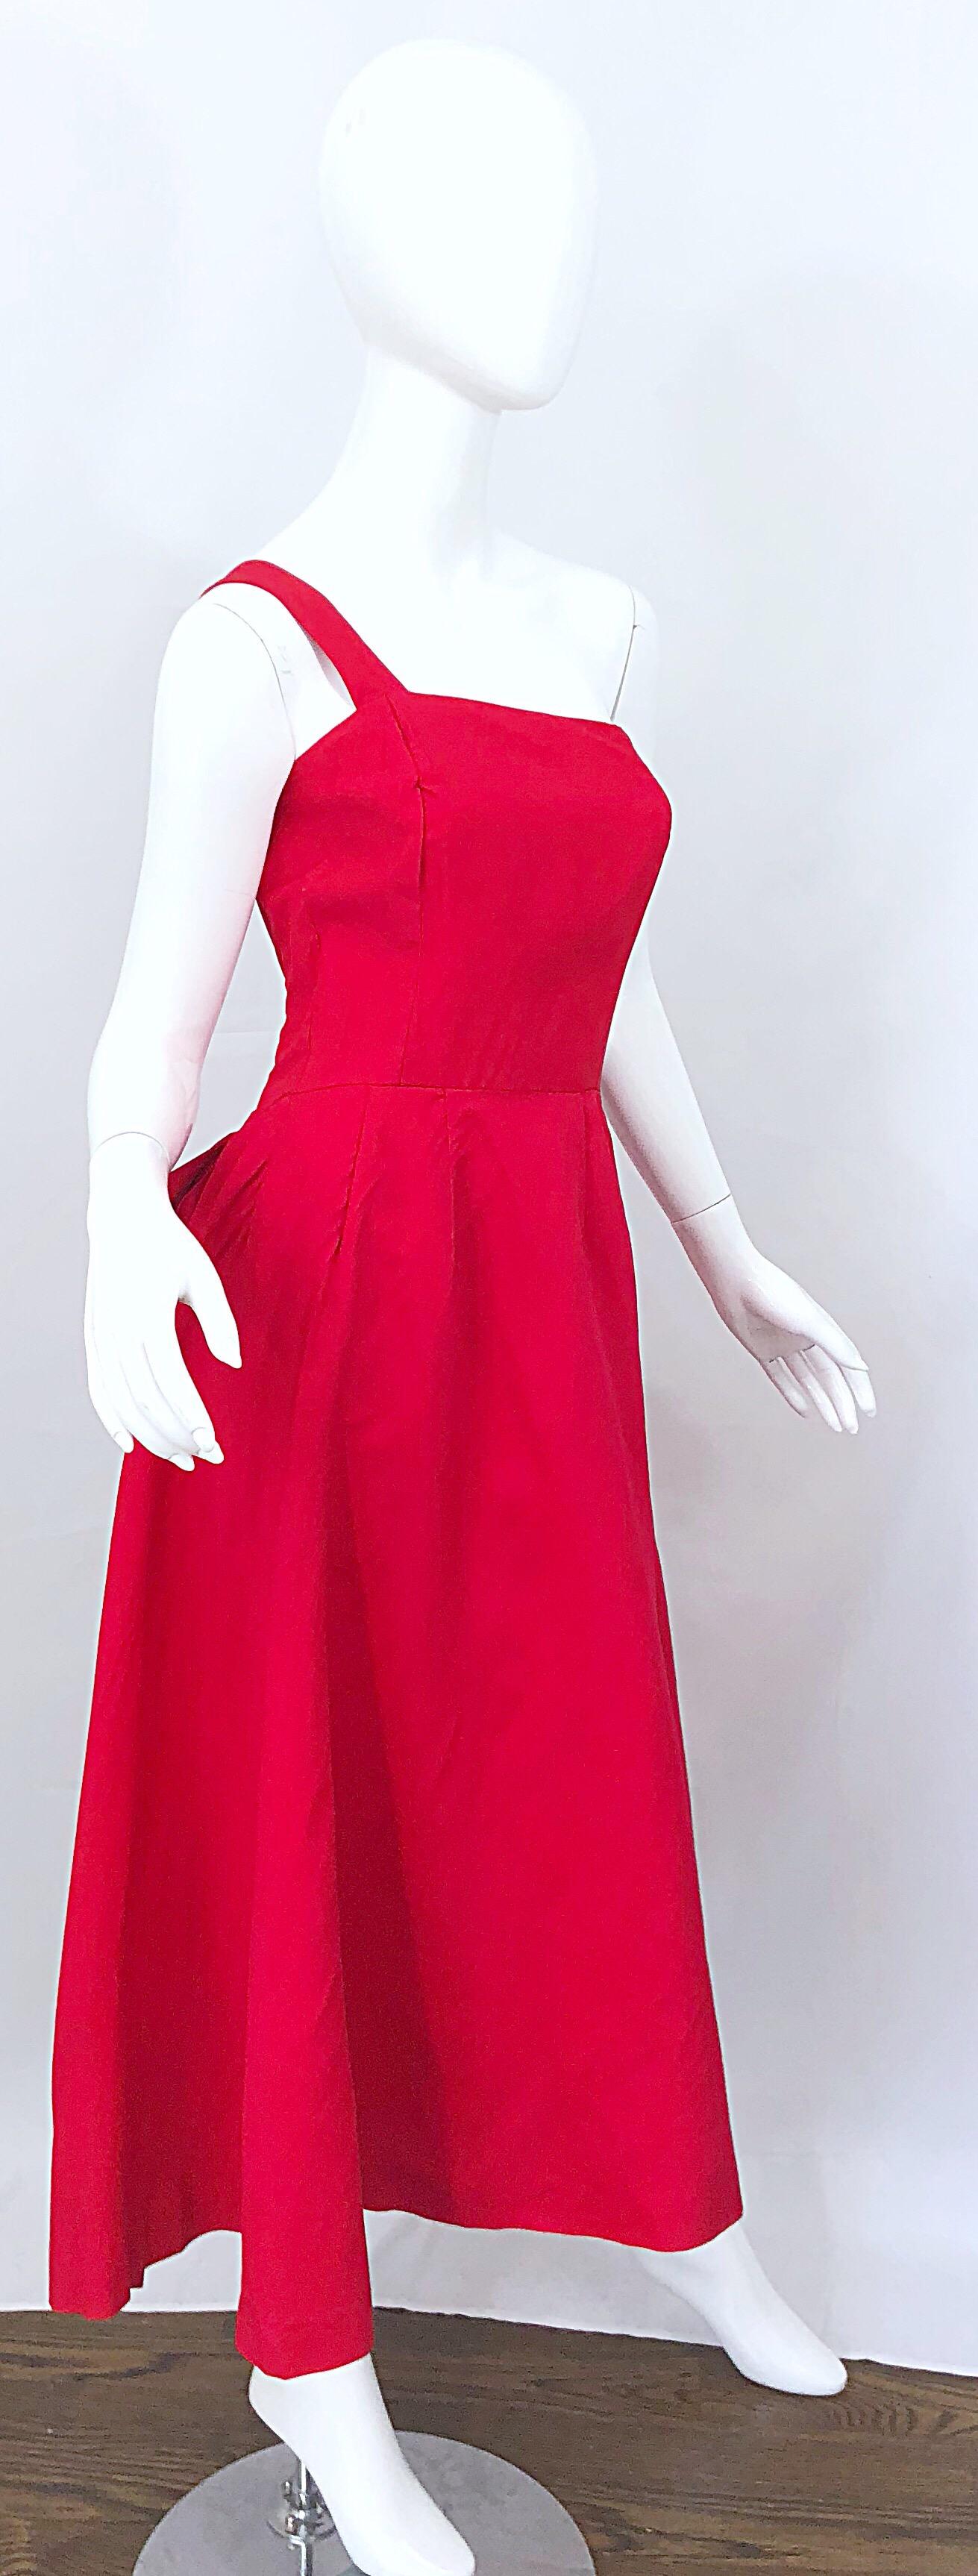 1950s Bess Myerson Lipstick Red + White One Shoulder Vintage 50s Silk Dress For Sale 4